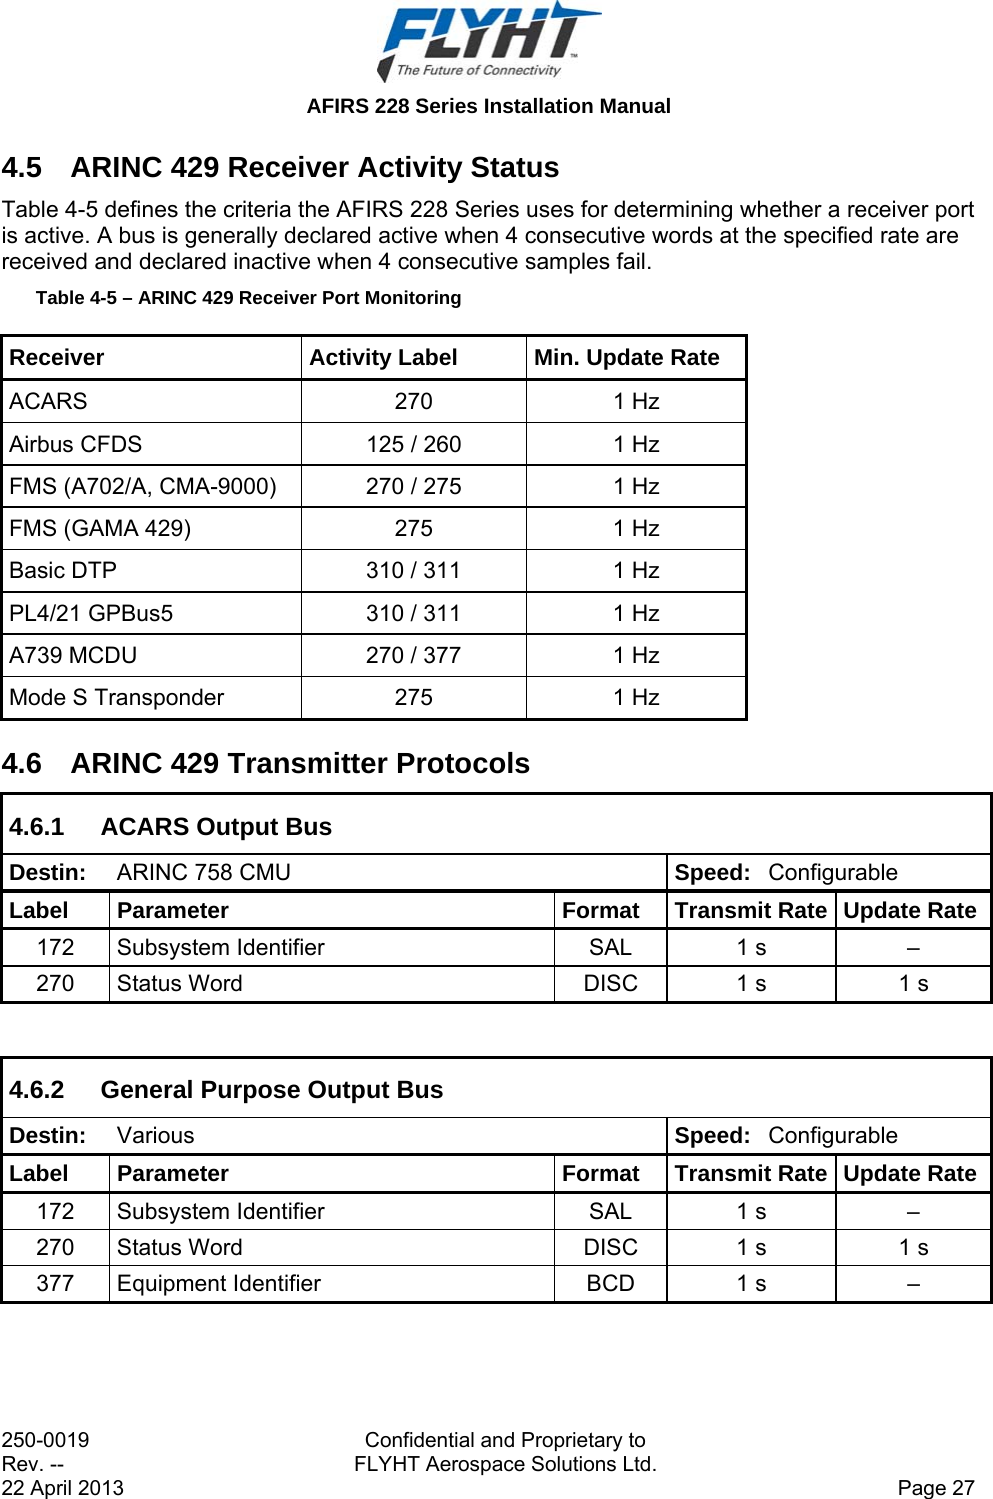  AFIRS 228 Series Installation Manual 250-0019  Confidential and Proprietary to Rev. --  FLYHT Aerospace Solutions Ltd. 22 April 2013    Page 27 4.5  ARINC 429 Receiver Activity Status Table 4-5 defines the criteria the AFIRS 228 Series uses for determining whether a receiver port is active. A bus is generally declared active when 4 consecutive words at the specified rate are received and declared inactive when 4 consecutive samples fail. Table 4-5 – ARINC 429 Receiver Port Monitoring Receiver  Activity Label  Min. Update Rate ACARS 270 1 Hz Airbus CFDS  125 / 260  1 Hz FMS (A702/A, CMA-9000)  270 / 275  1 Hz FMS (GAMA 429)  275  1 Hz Basic DTP  310 / 311  1 Hz PL4/21 GPBus5  310 / 311  1 Hz A739 MCDU  270 / 377  1 Hz Mode S Transponder  275  1 Hz 4.6  ARINC 429 Transmitter Protocols 4.6.1  ACARS Output Bus Destin:  ARINC 758 CMU  Speed:  Configurable Label  Parameter  Format  Transmit Rate  Update Rate 172  Subsystem Identifier  SAL  1 s  – 270  Status Word  DISC  1 s  1 s  4.6.2  General Purpose Output Bus Destin:  Various  Speed:  Configurable Label  Parameter  Format  Transmit Rate  Update Rate 172  Subsystem Identifier  SAL  1 s  – 270  Status Word  DISC  1 s  1 s 377  Equipment Identifier  BCD  1 s  –   